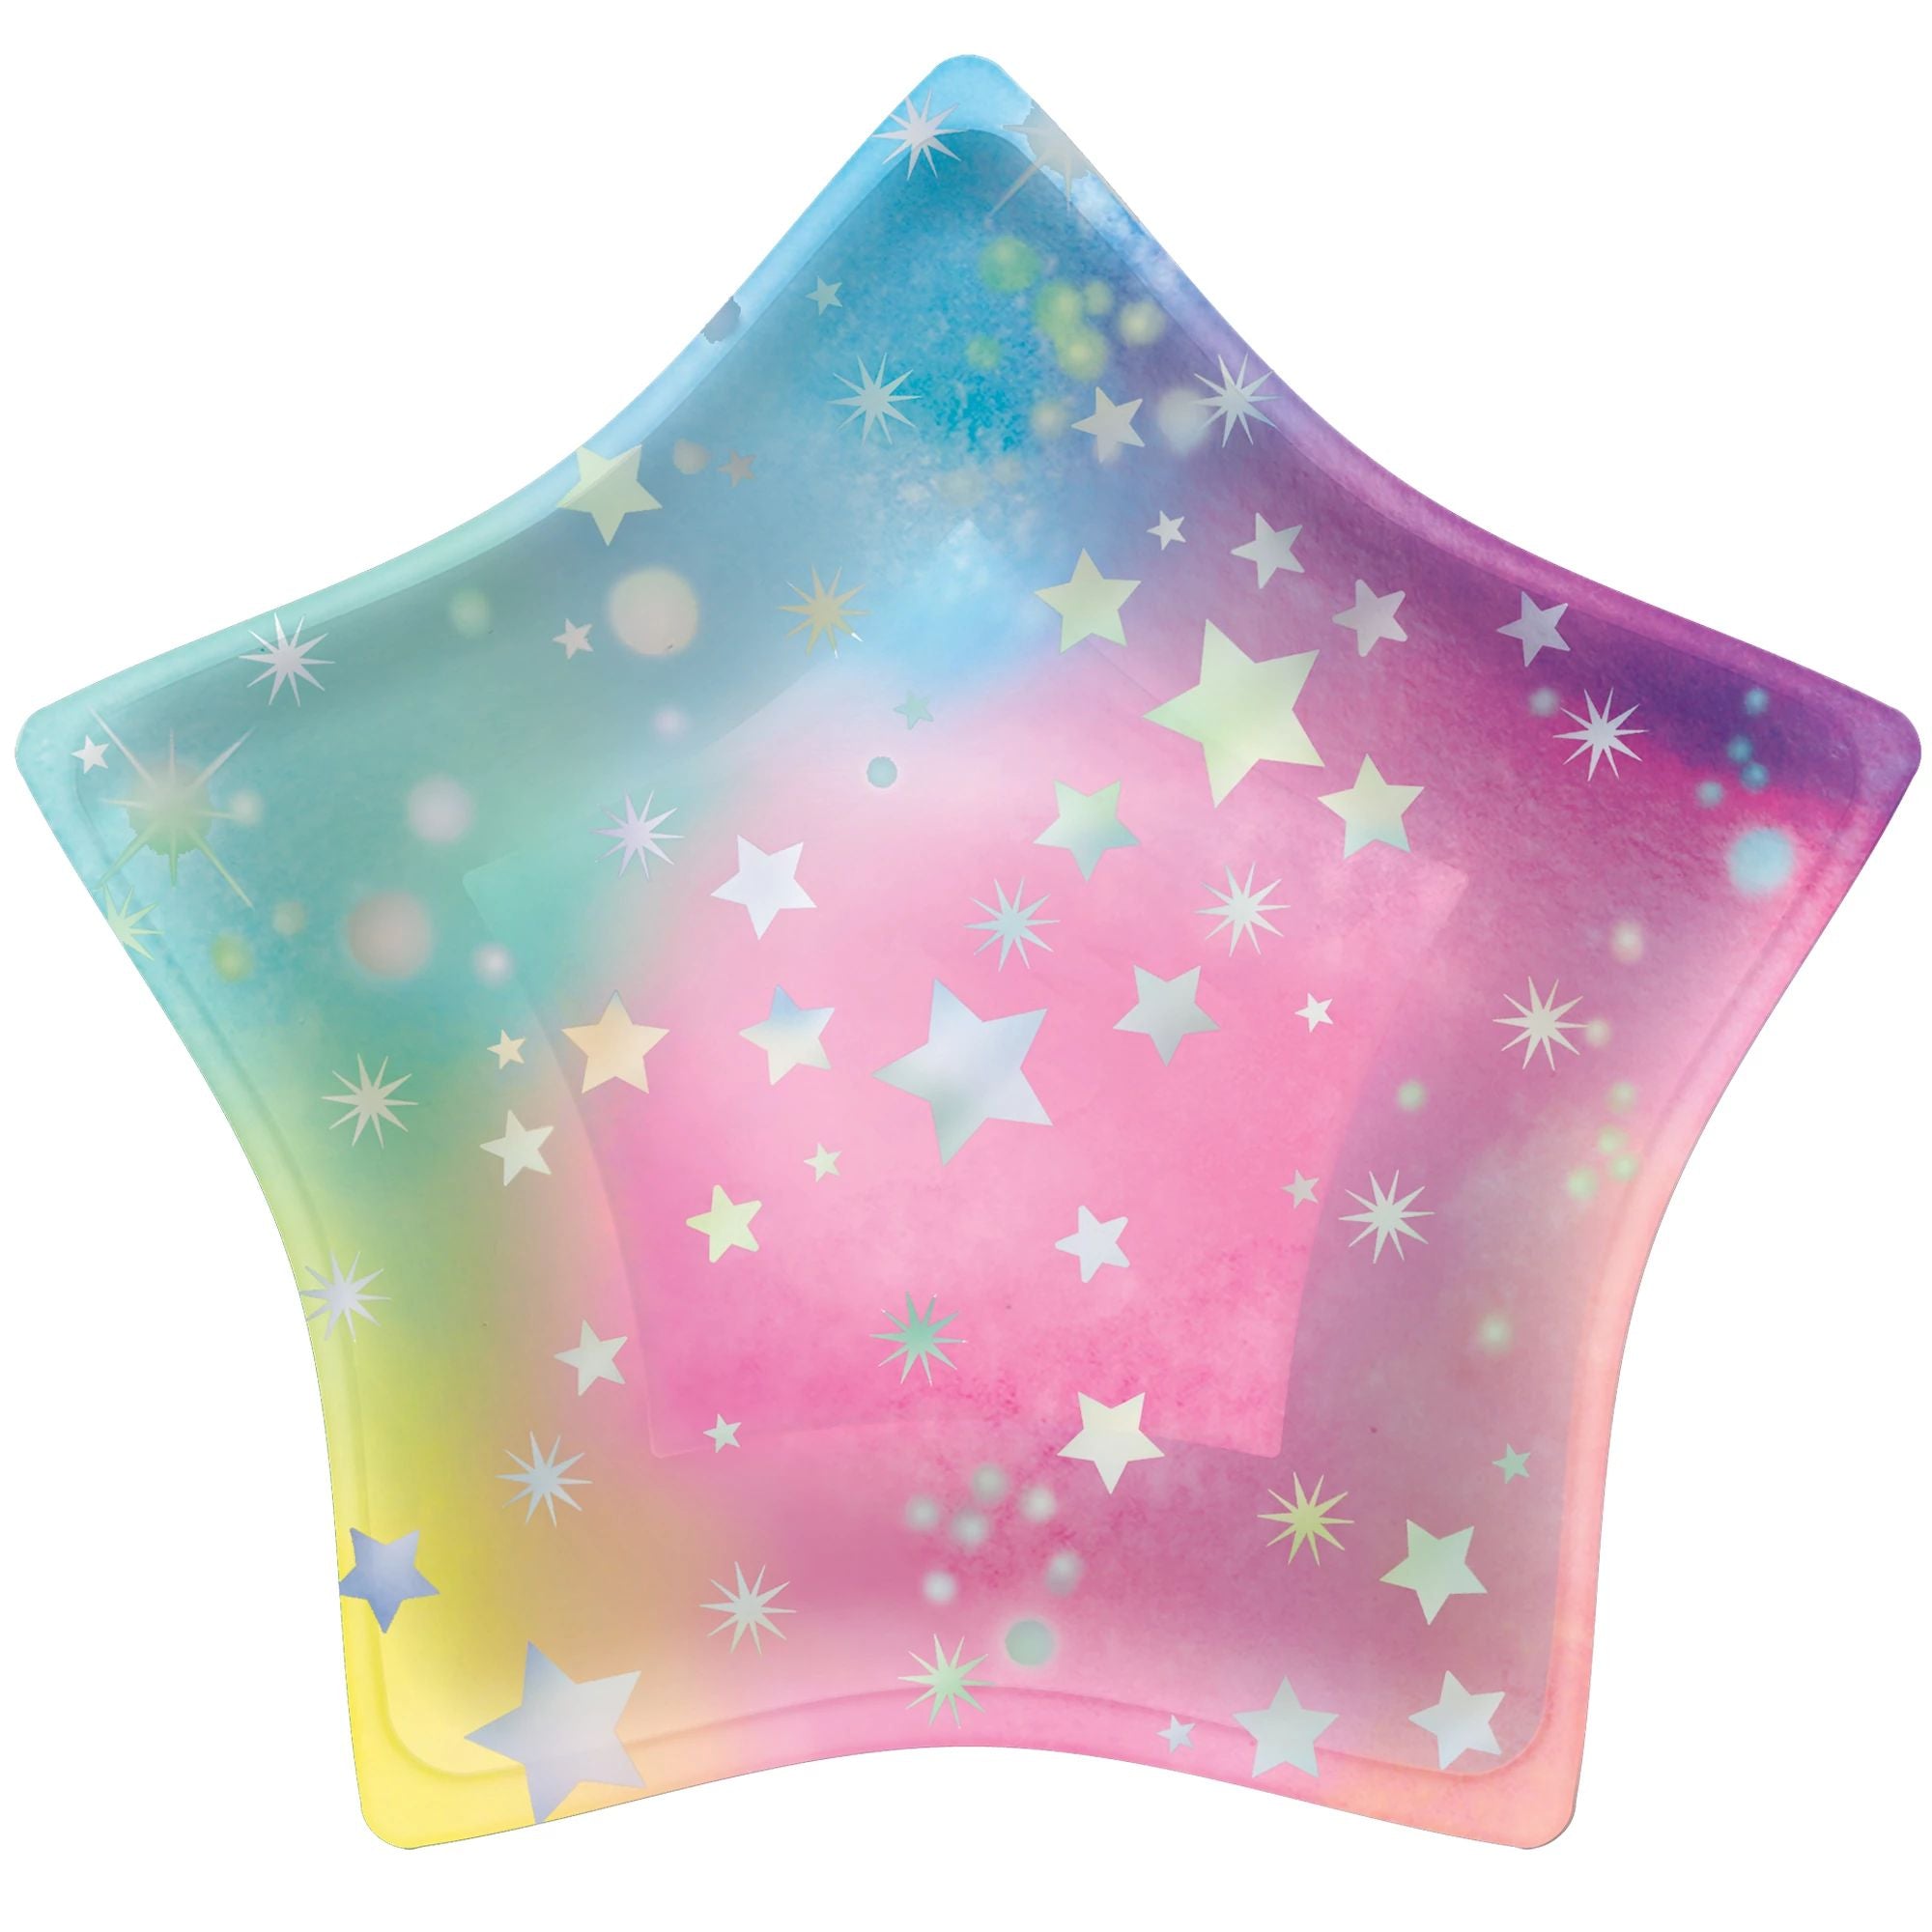 Luminous Birthday Small Star-Shaped Dessert Paper Plates, 7 Inches, 8 Count